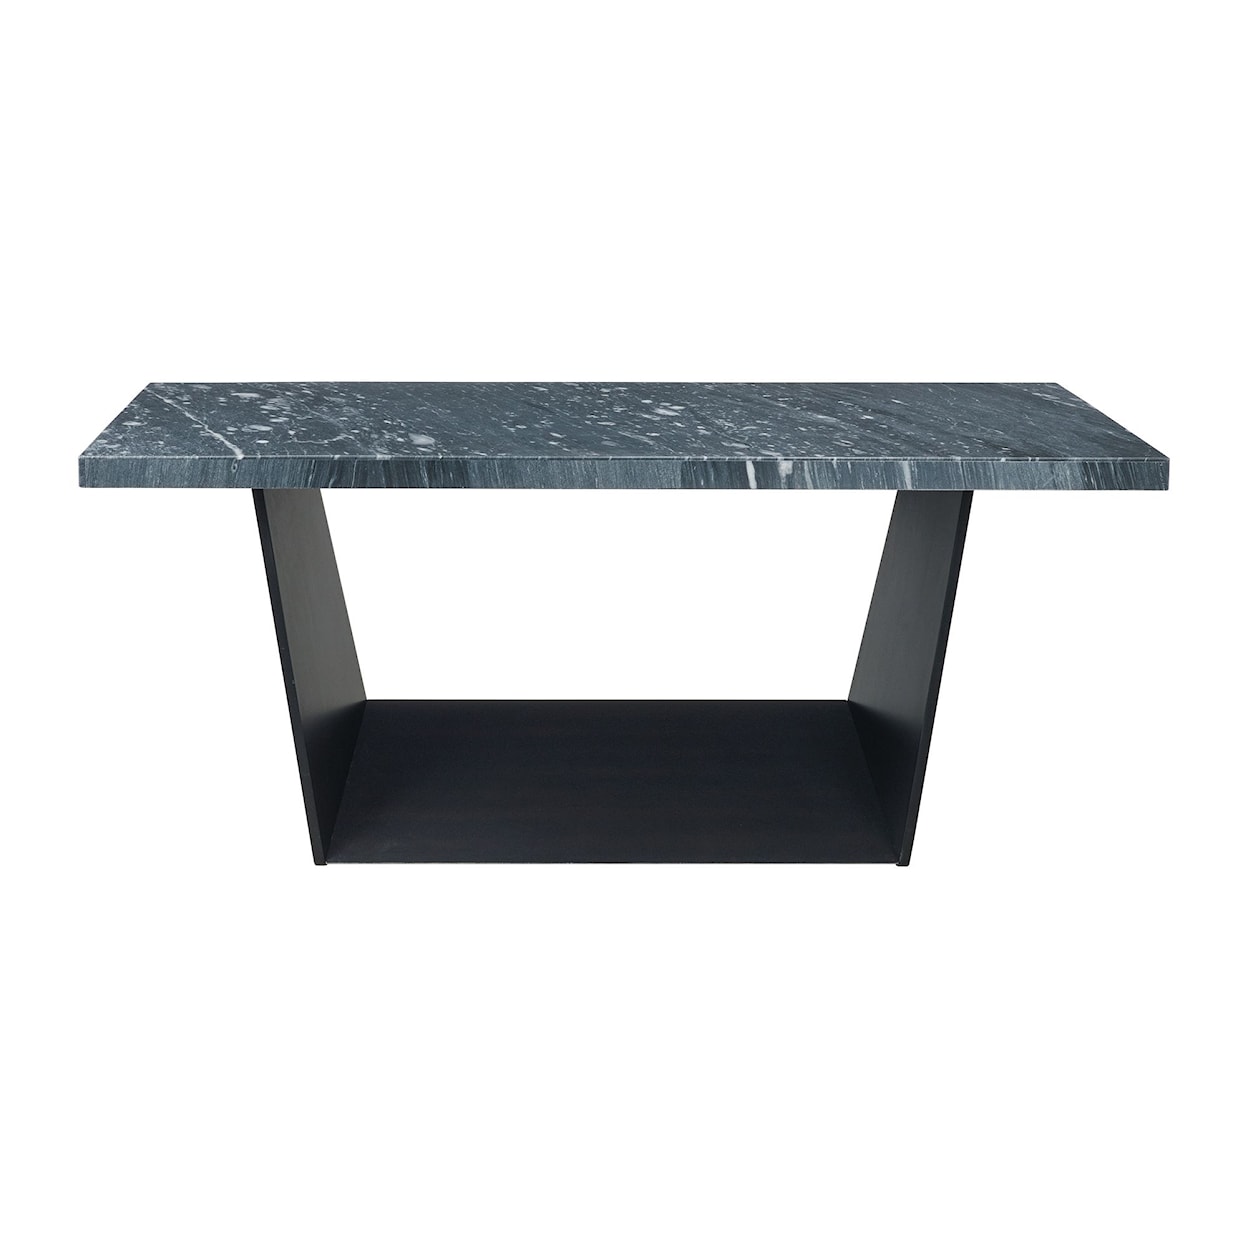 Elements International Beckley Dining Table with Marble Top